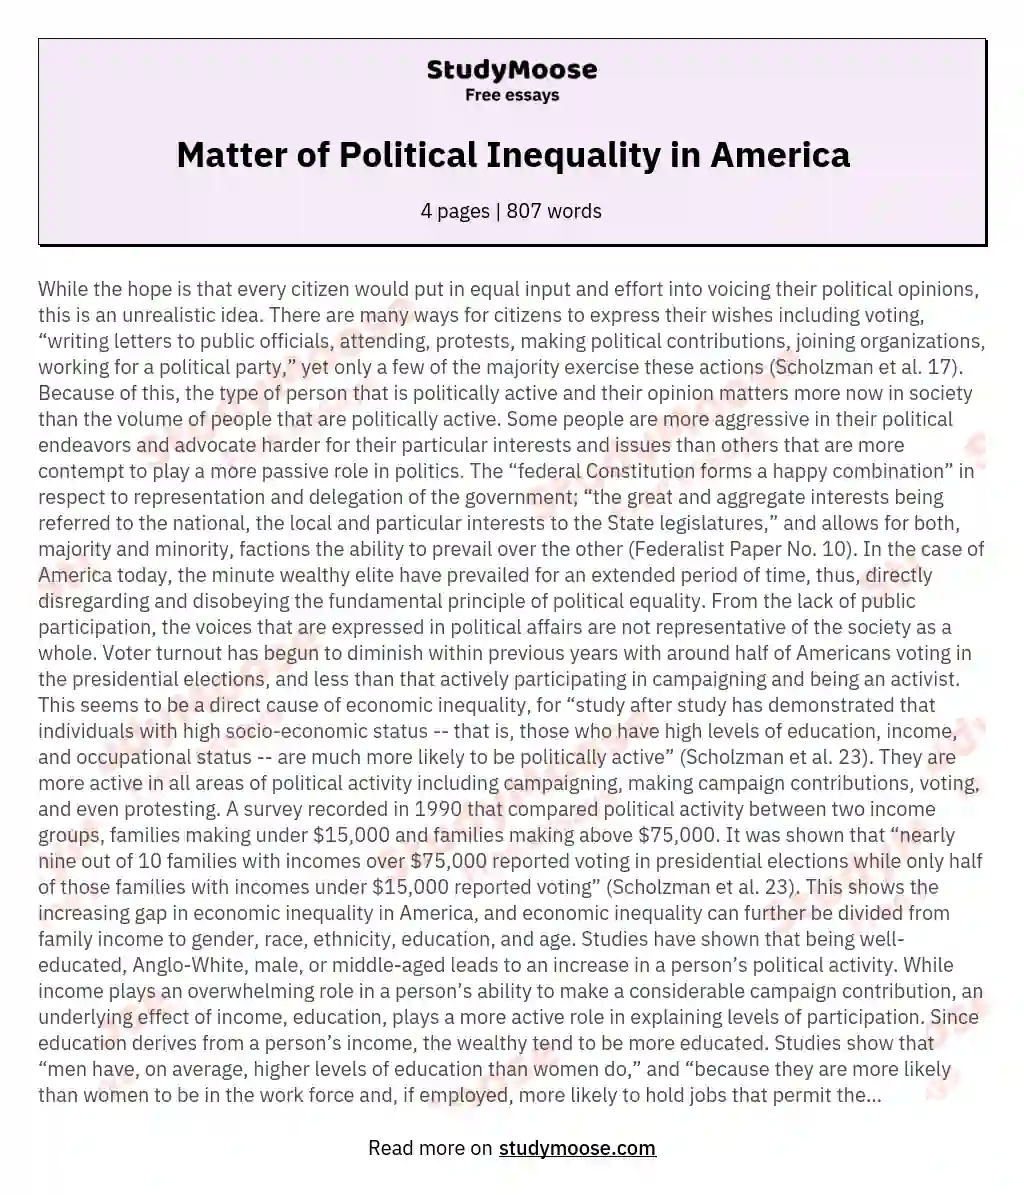 Matter of Political Inequality in America essay